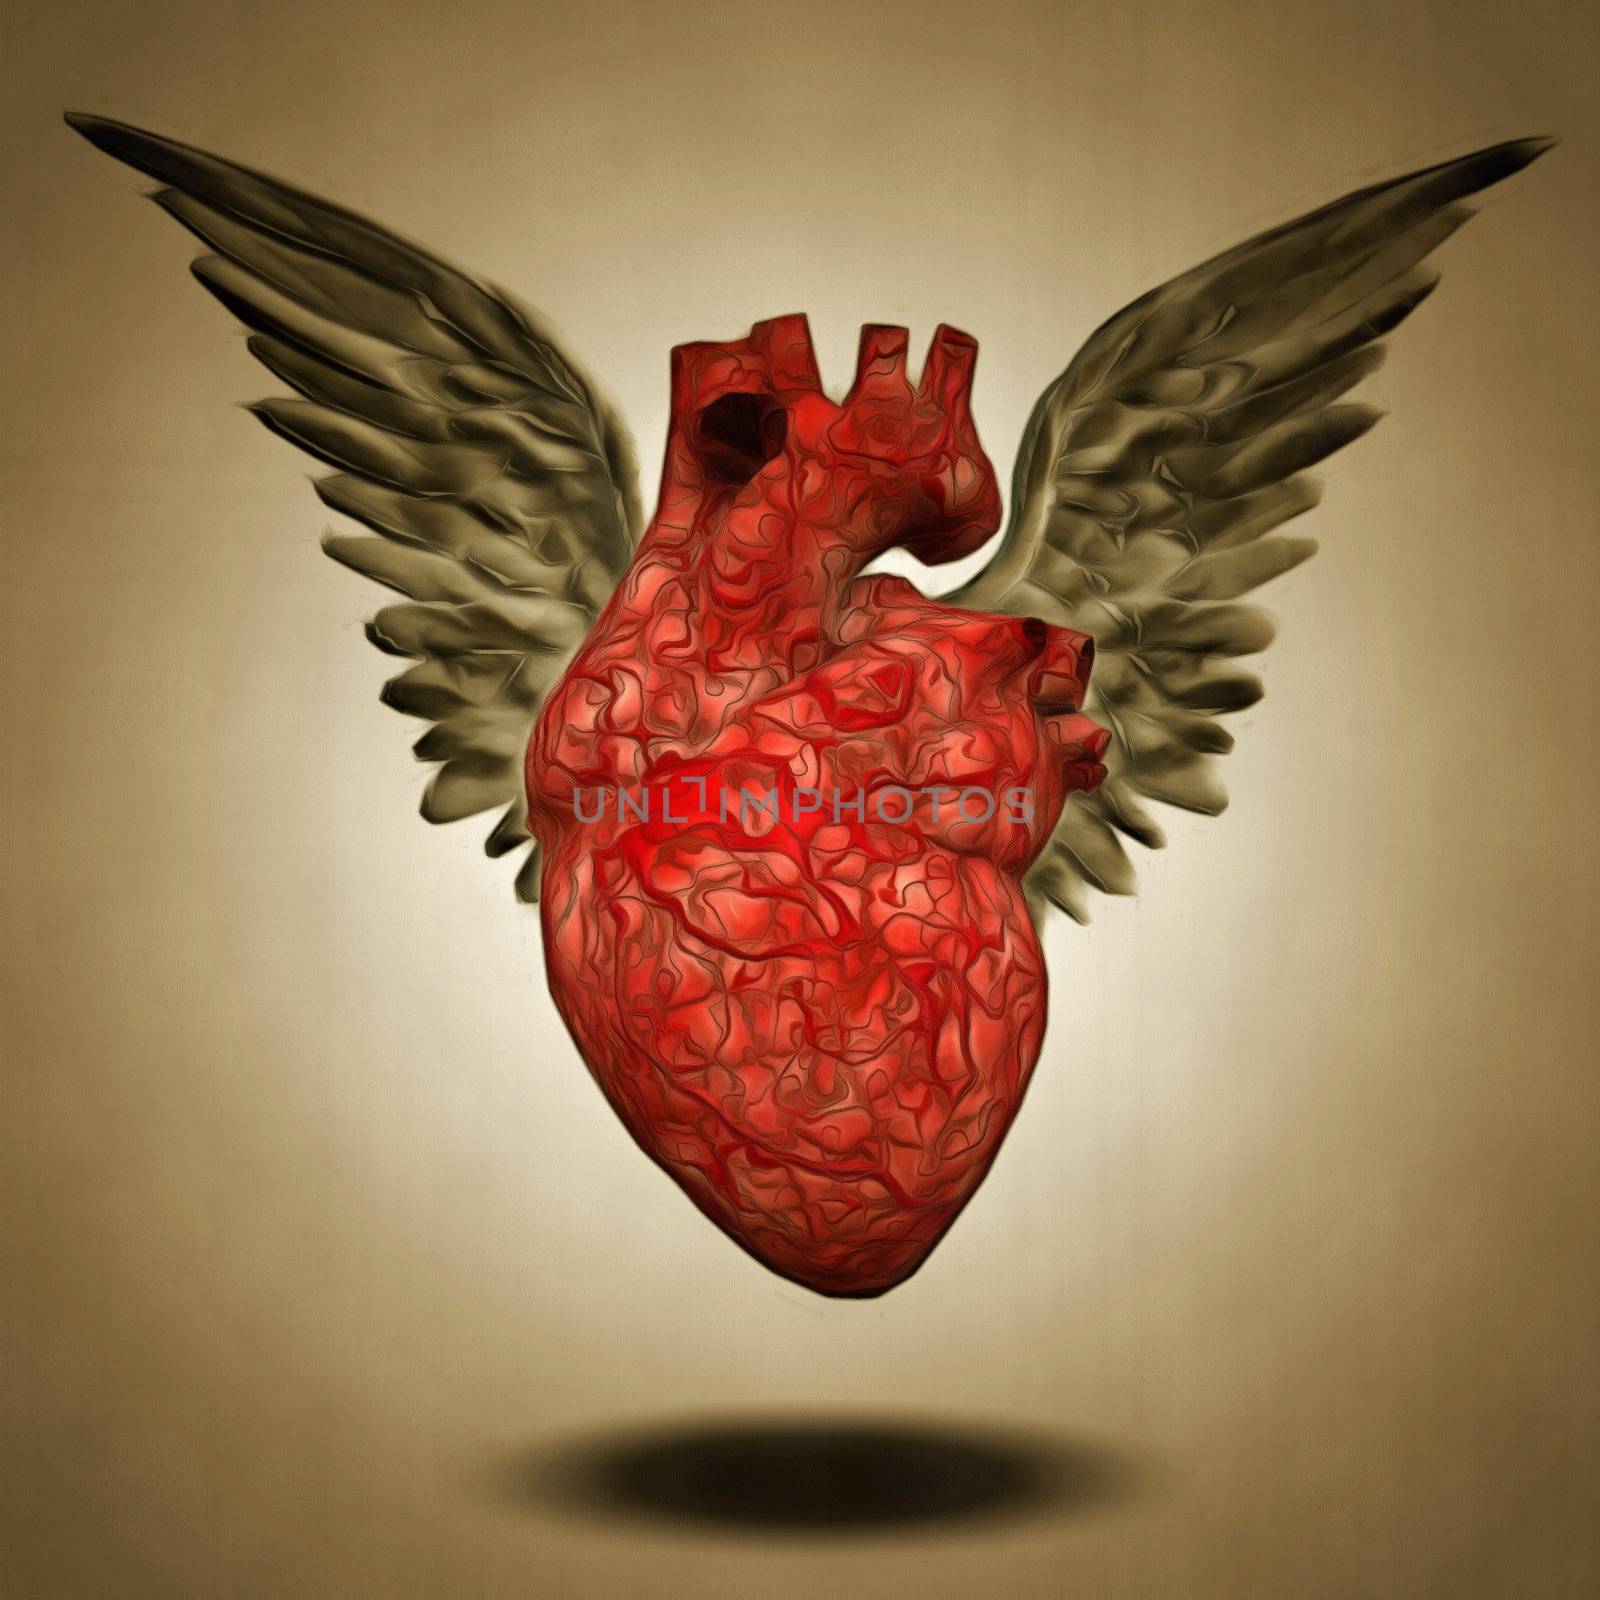 Surreal painting. Winged heart.